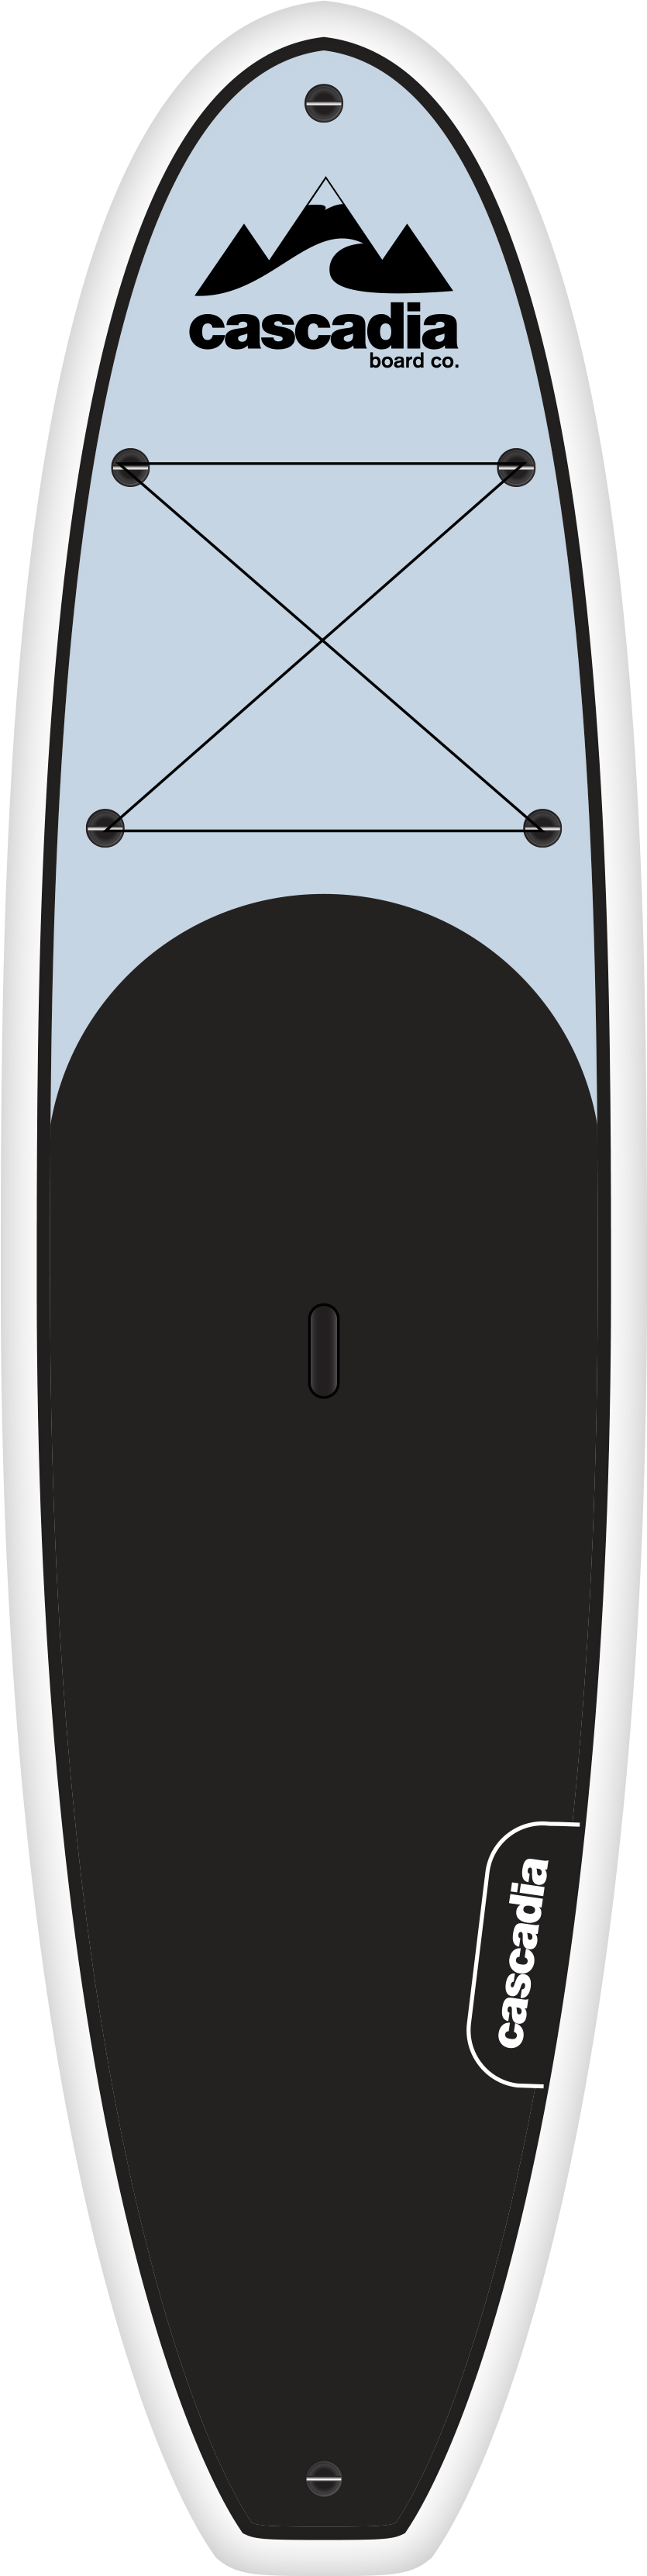 Image Transparent Library Paddle Vector Surfboard - Surfboard (3600x3600)